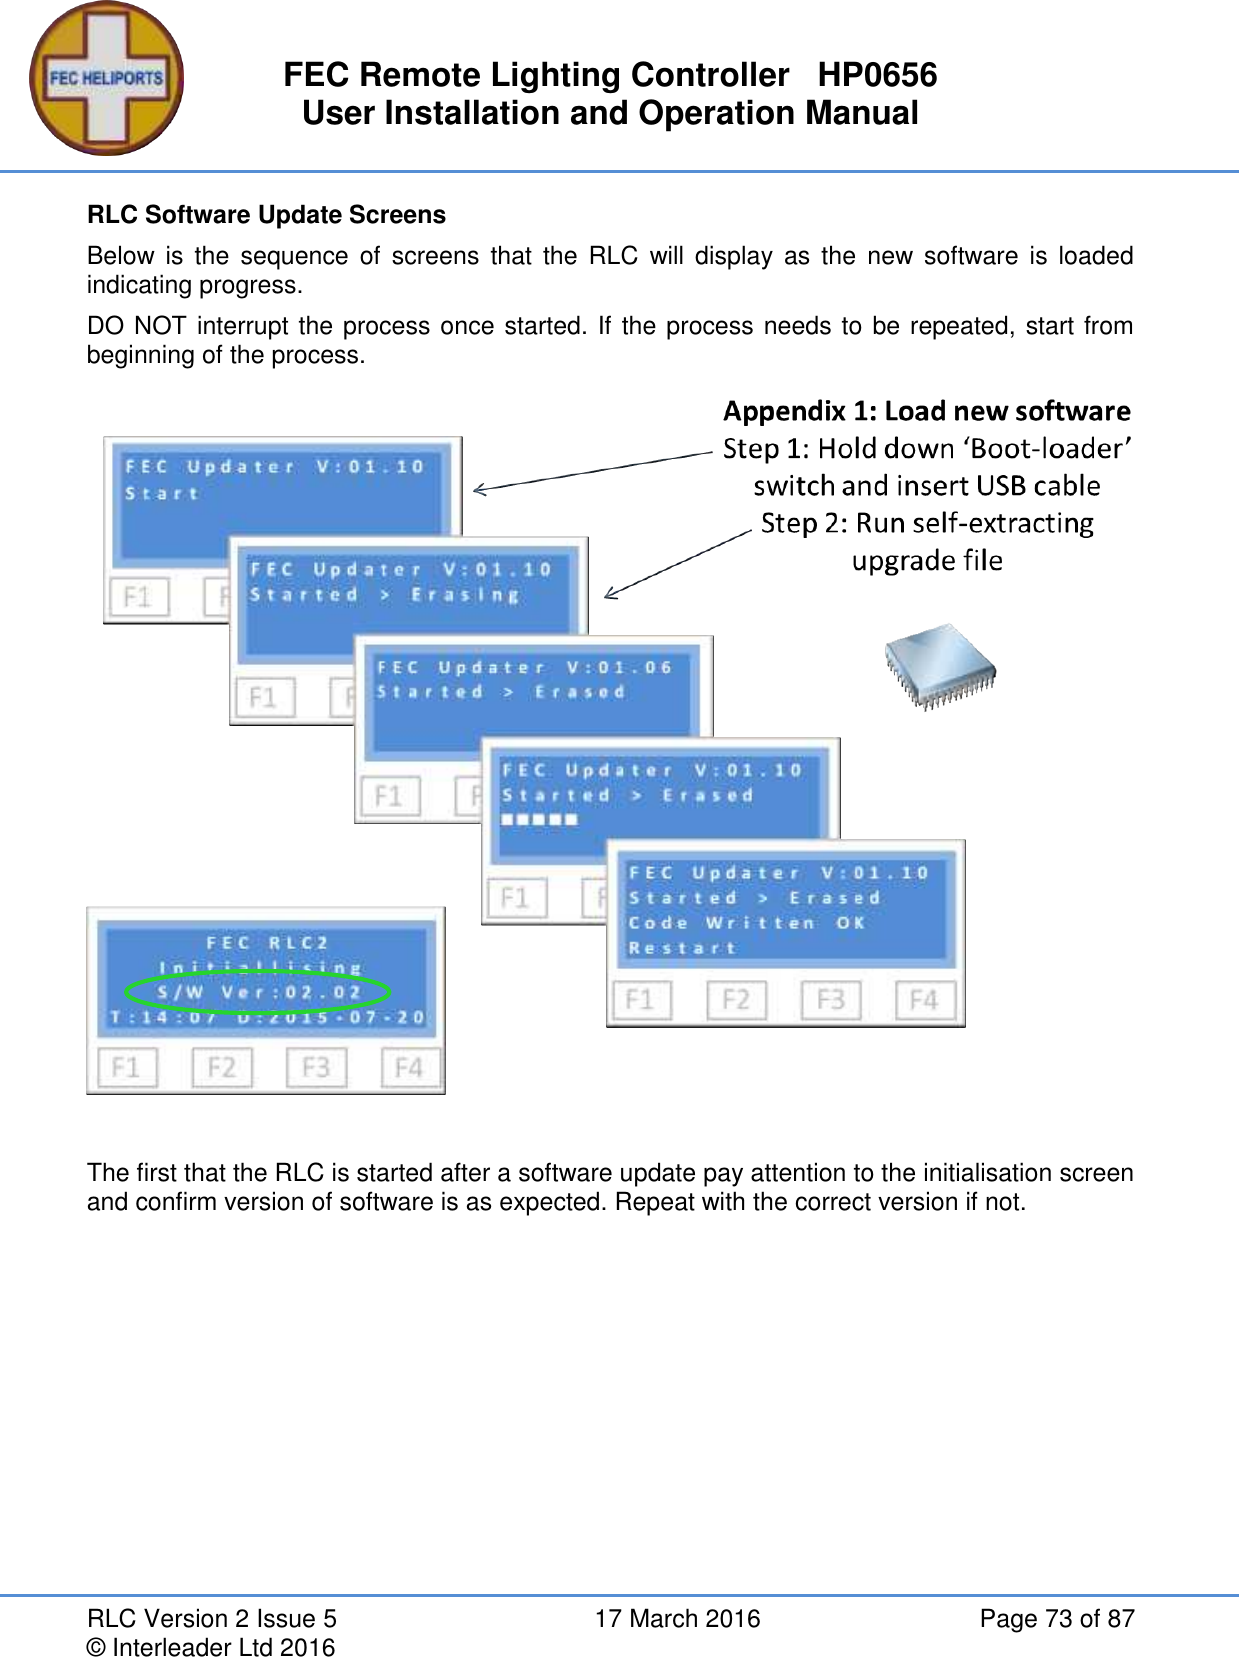 FEC Remote Lighting Controller   HP0656 User Installation and Operation Manual RLC Version 2 Issue 5  17 March 2016  Page 73 of 87 © Interleader Ltd 2016 RLC Software Update Screens Below  is  the  sequence  of  screens  that the RLC  will  display  as  the  new  software  is  loaded indicating progress. DO NOT interrupt the process once started. If the process needs to be repeated, start from beginning of the process.   The first that the RLC is started after a software update pay attention to the initialisation screen and confirm version of software is as expected. Repeat with the correct version if not.   